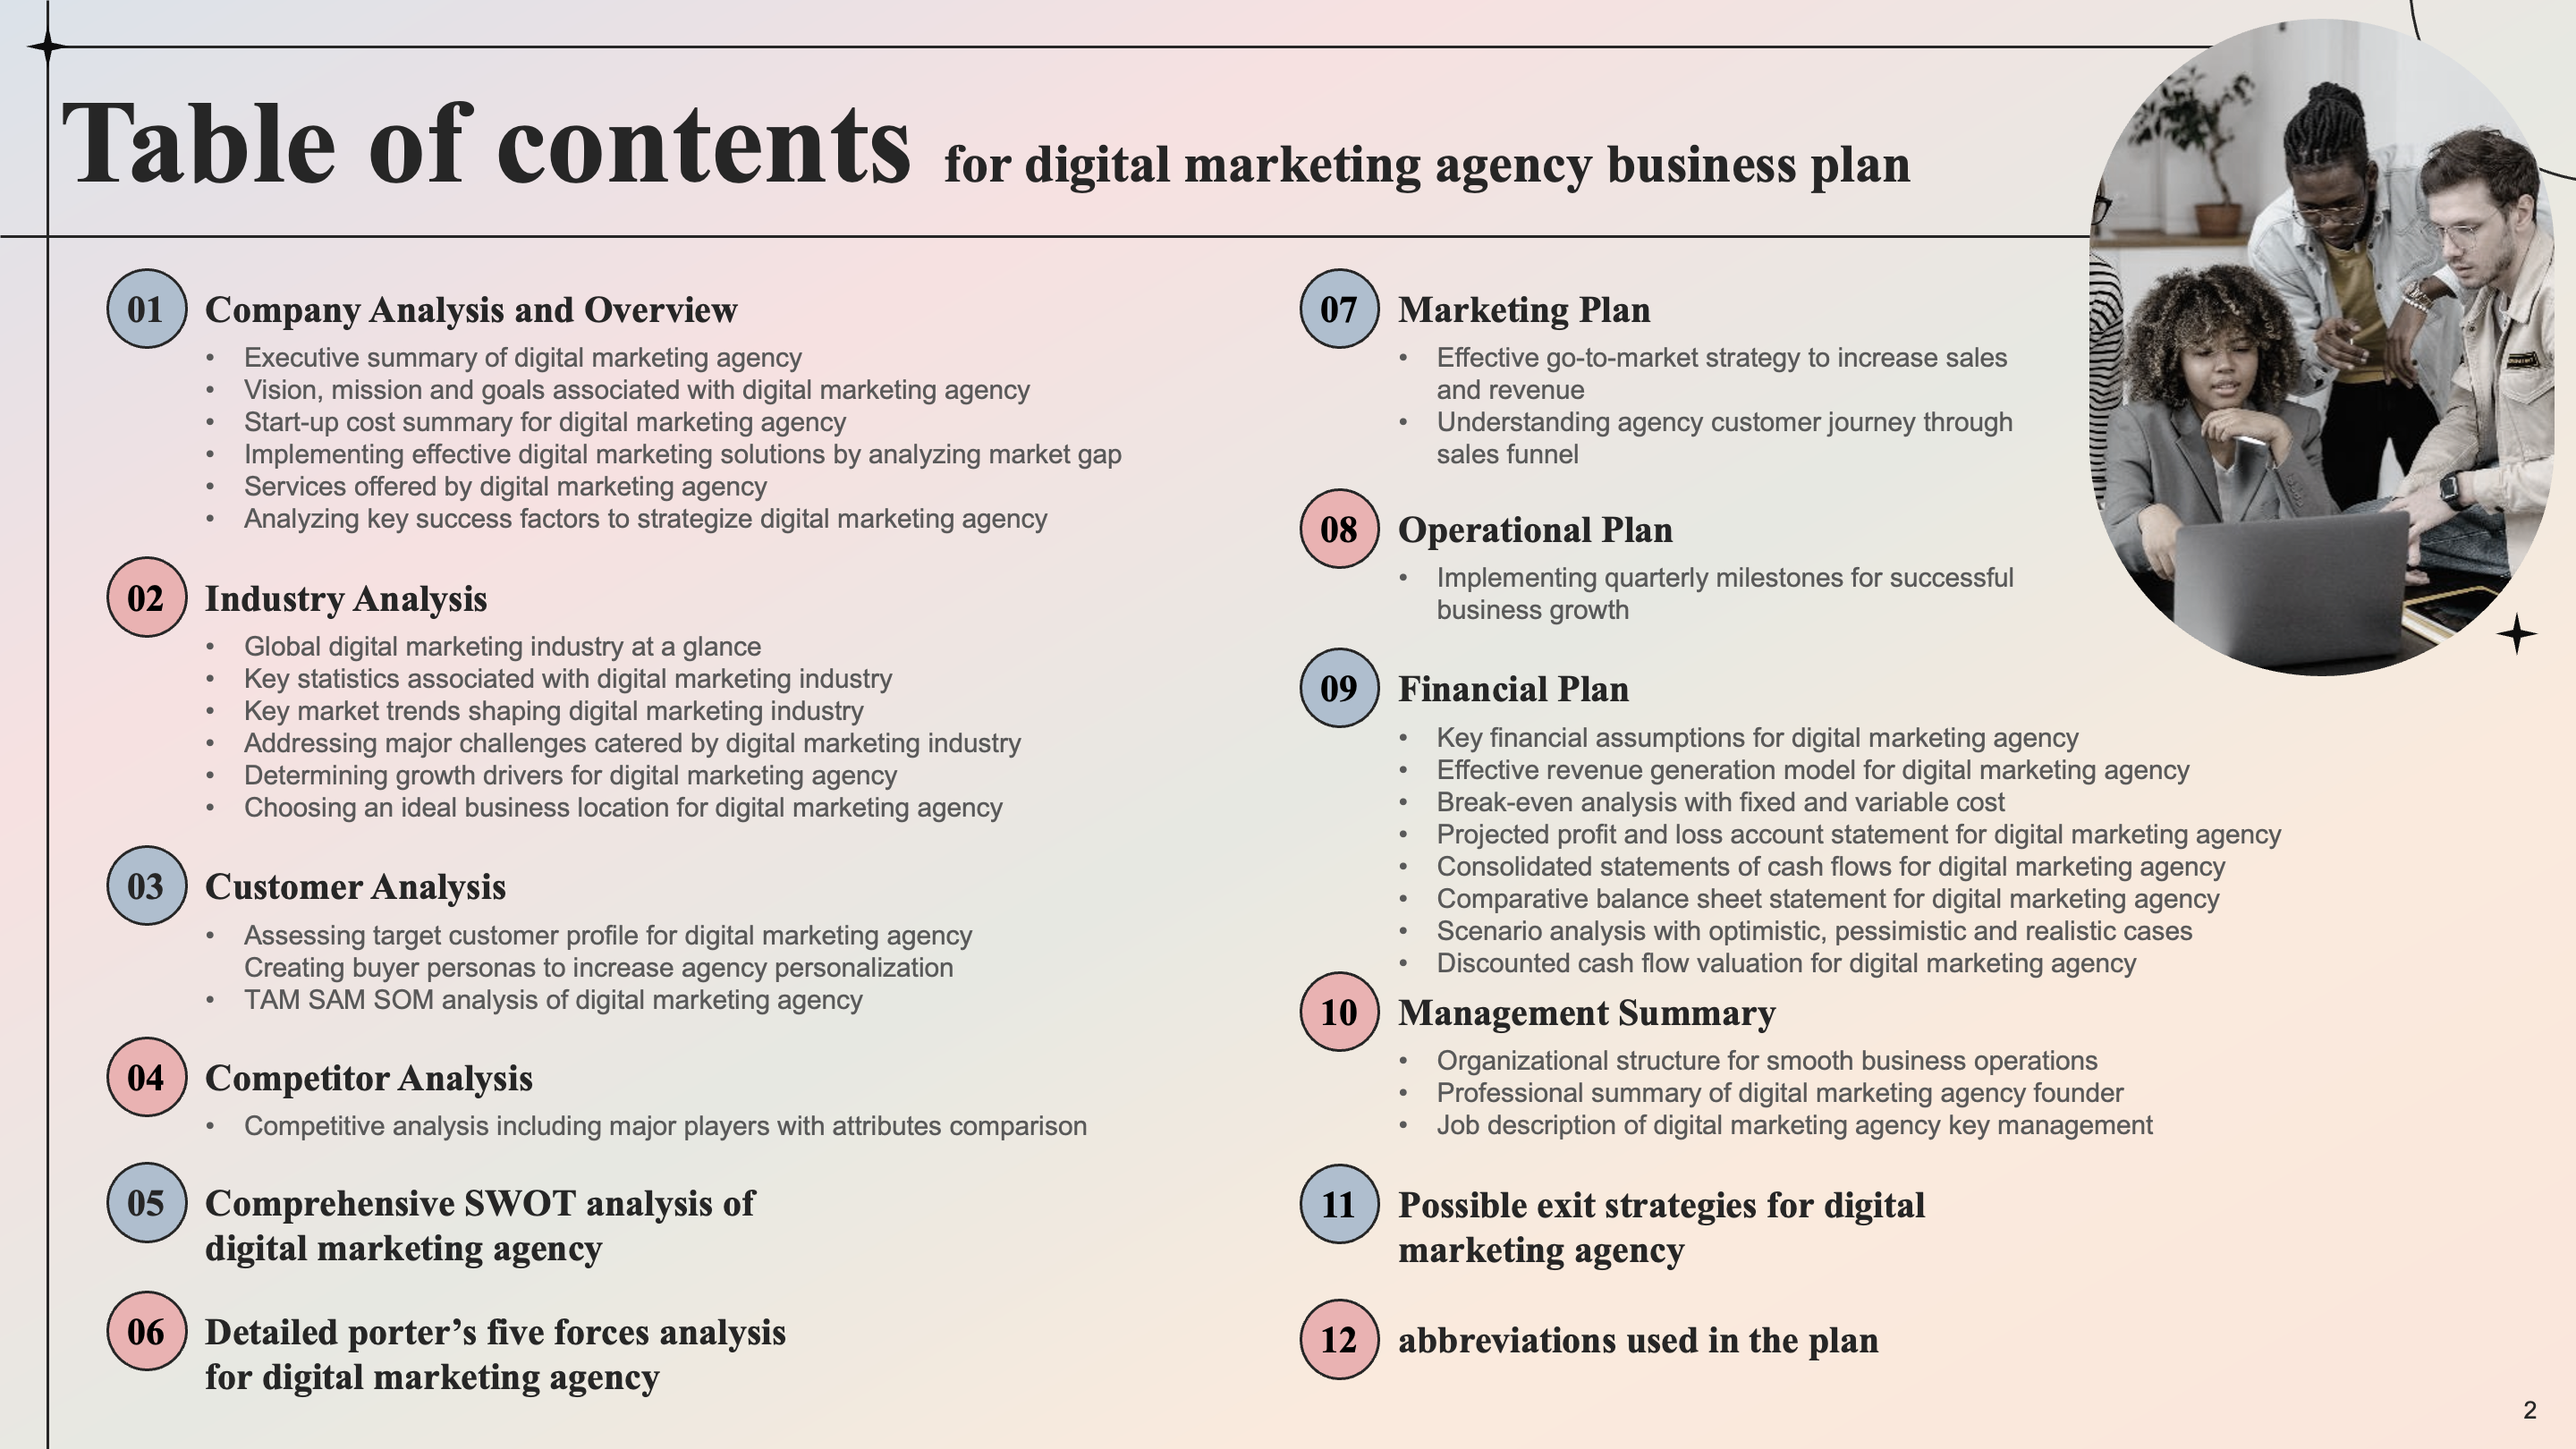 Table of Contents for Digital Marketing Agency Business Plan